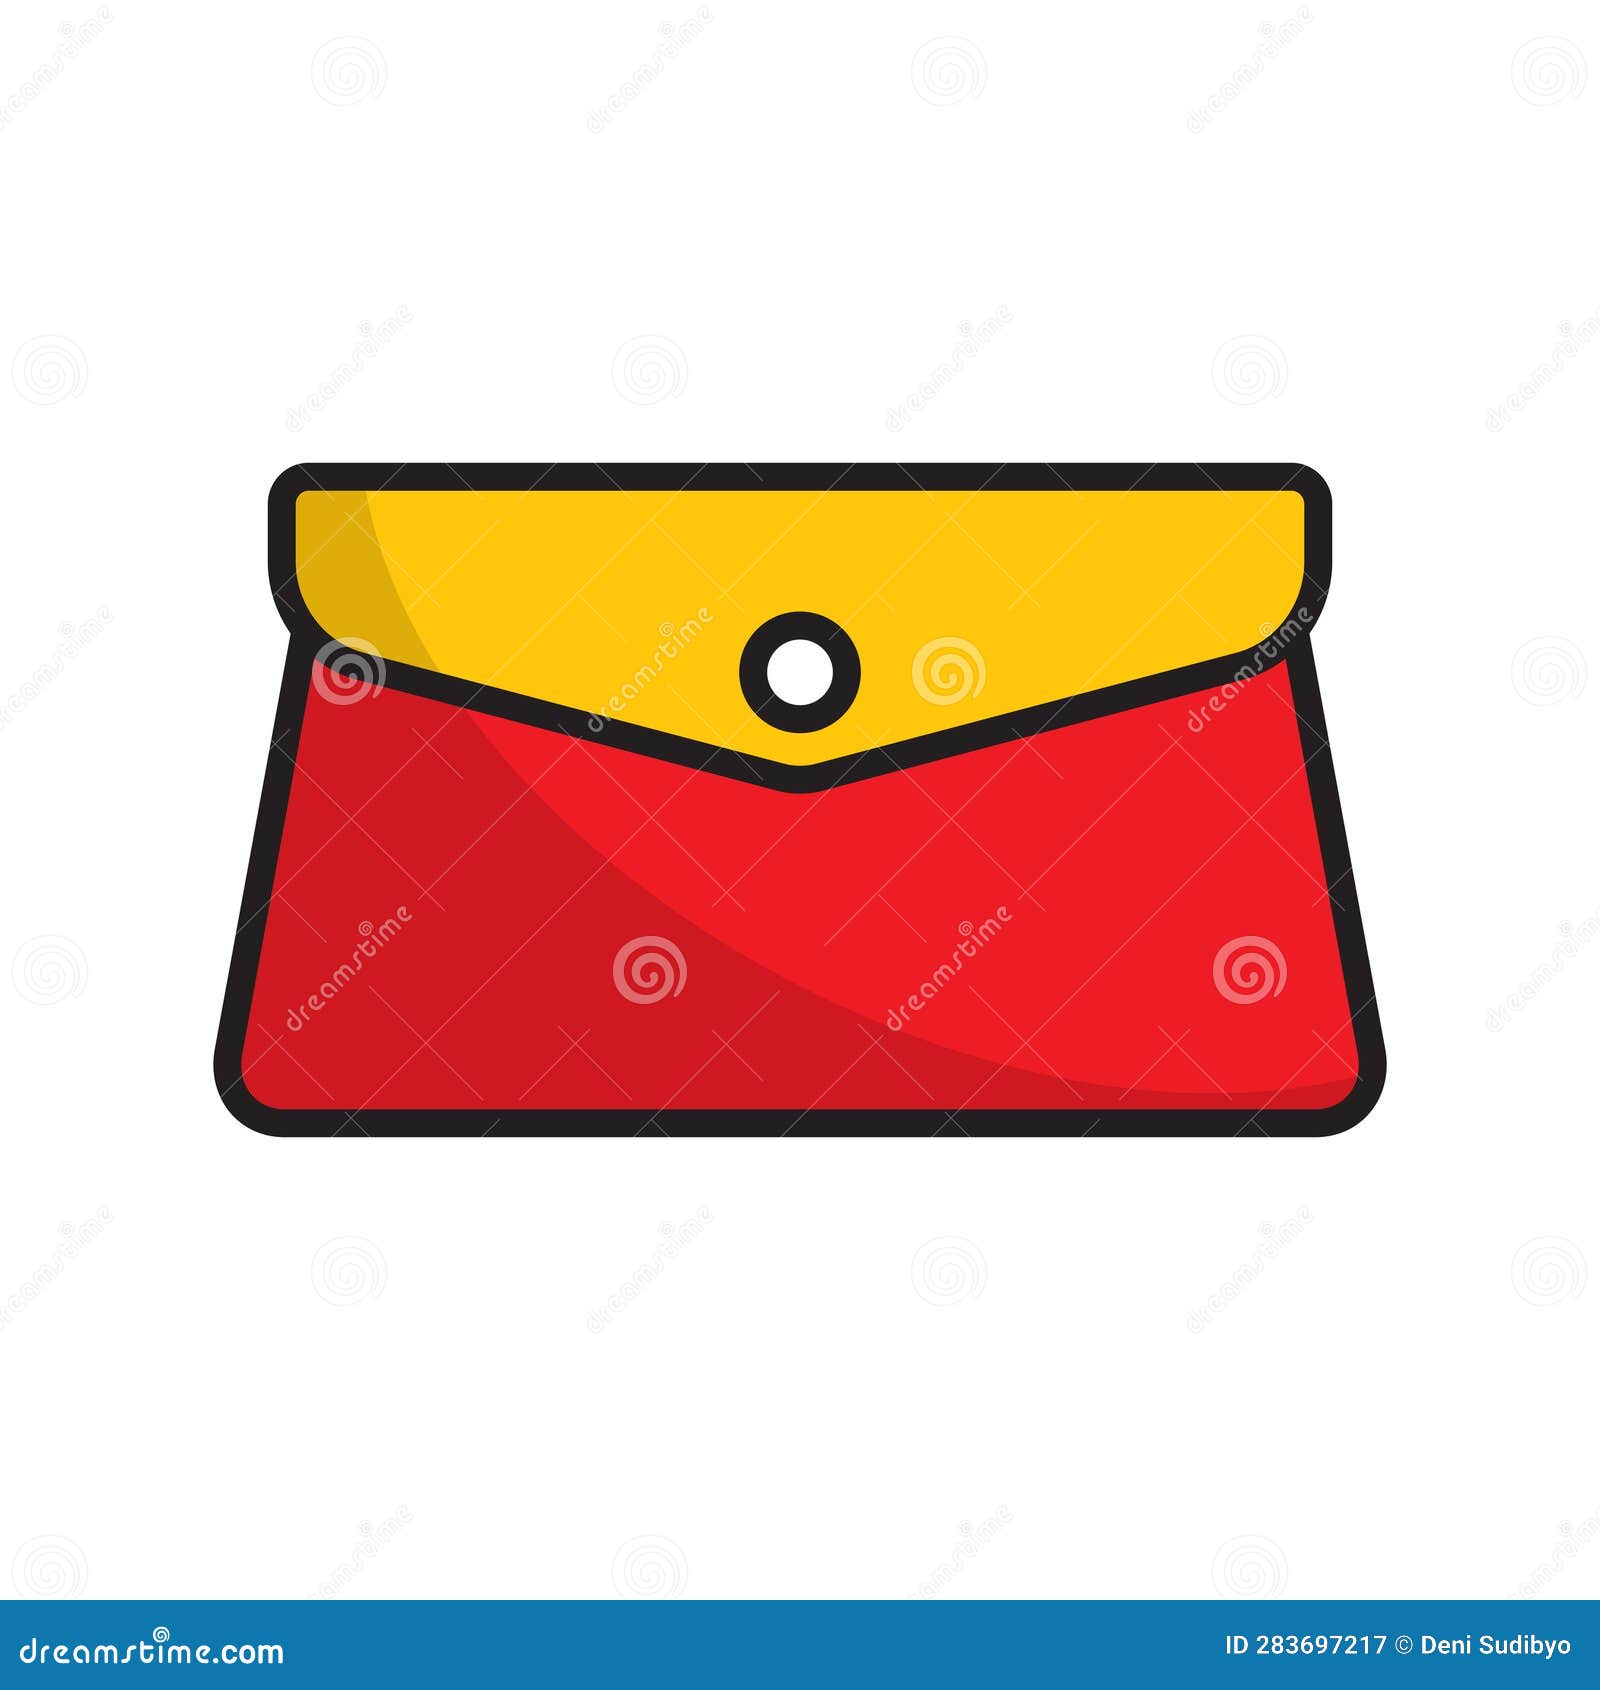 How To Make An Envelope Clutch Purse